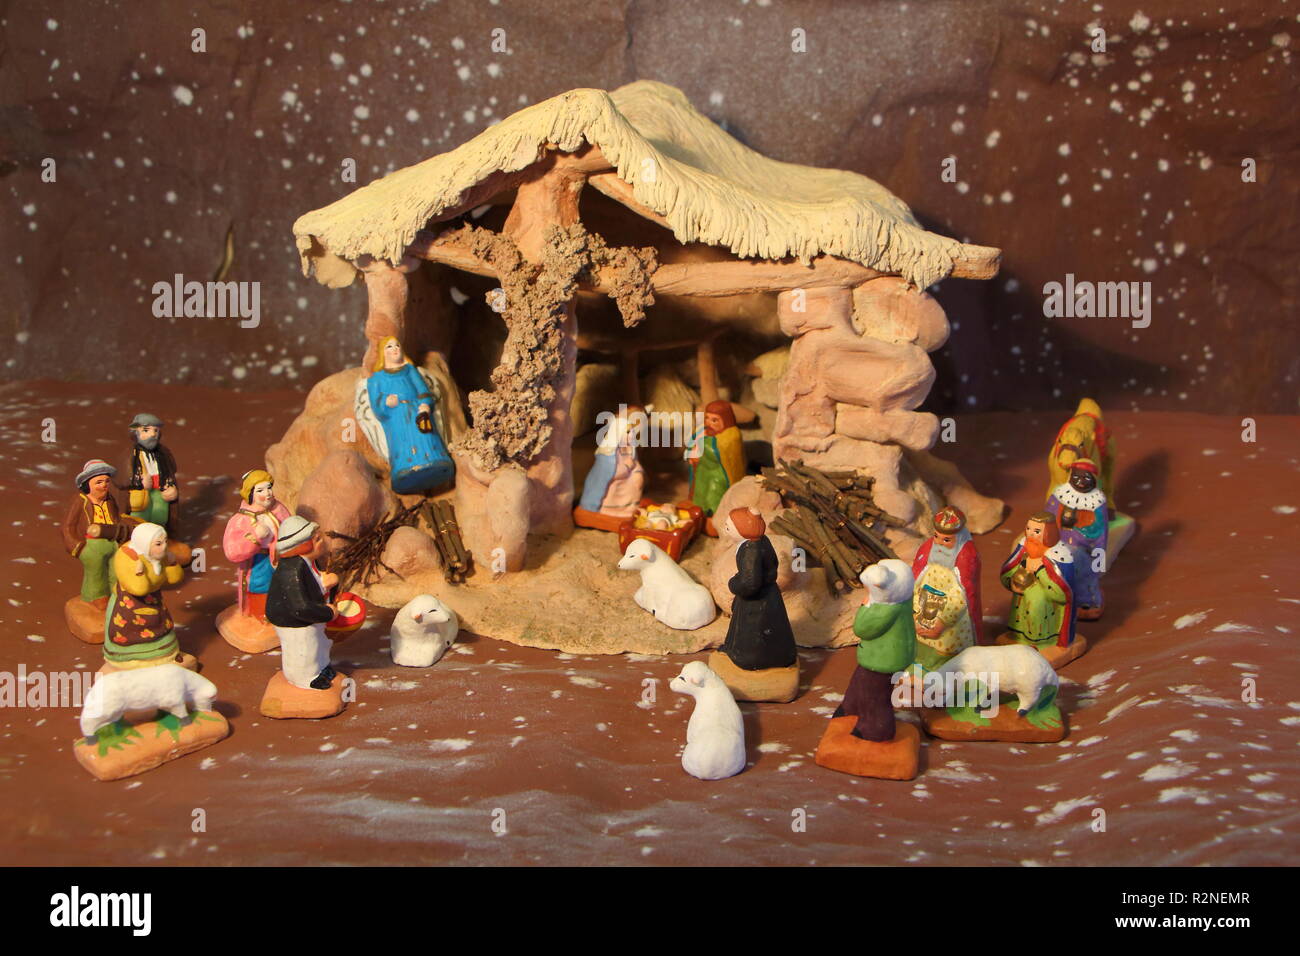 Traditional nativity scene with provencal Christmas crib figures in terracotta Stock Photo